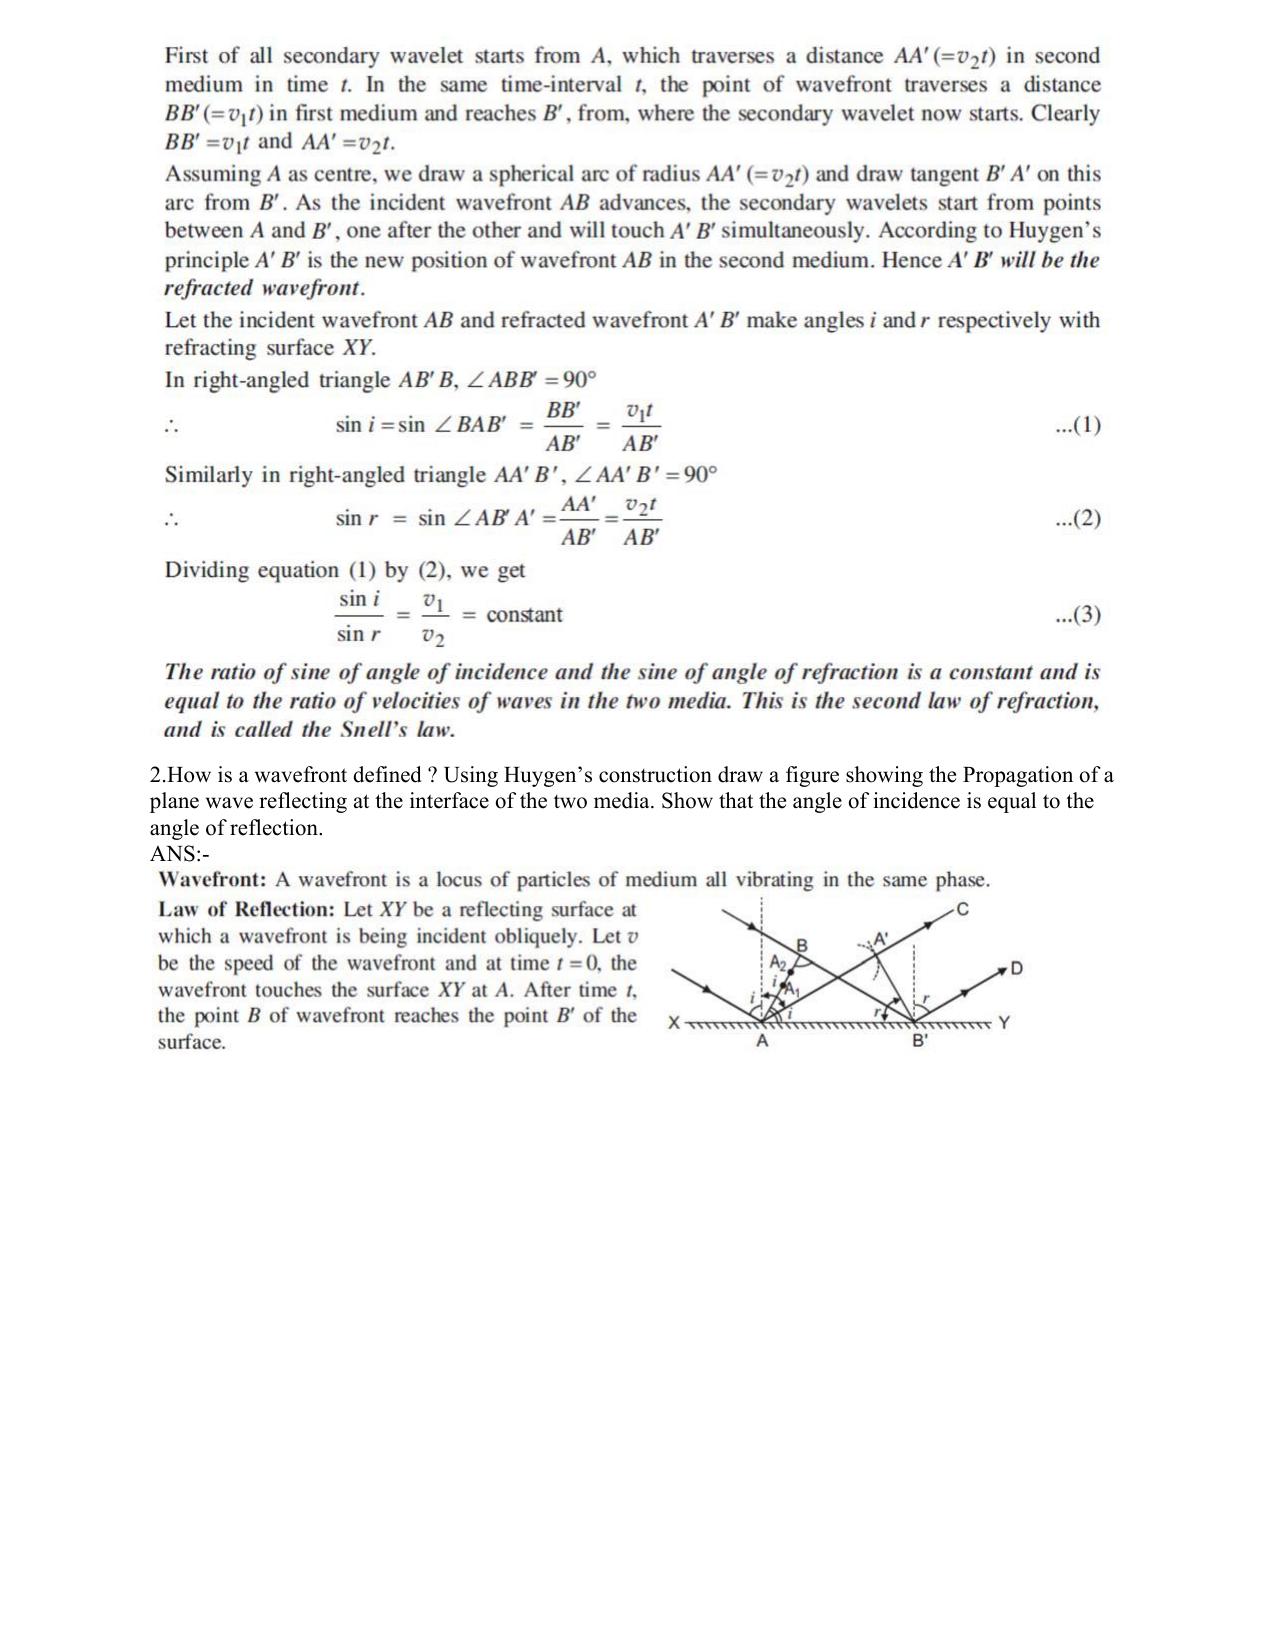 CBSE Class 12 Physics Worksheets for Optics - Page 12